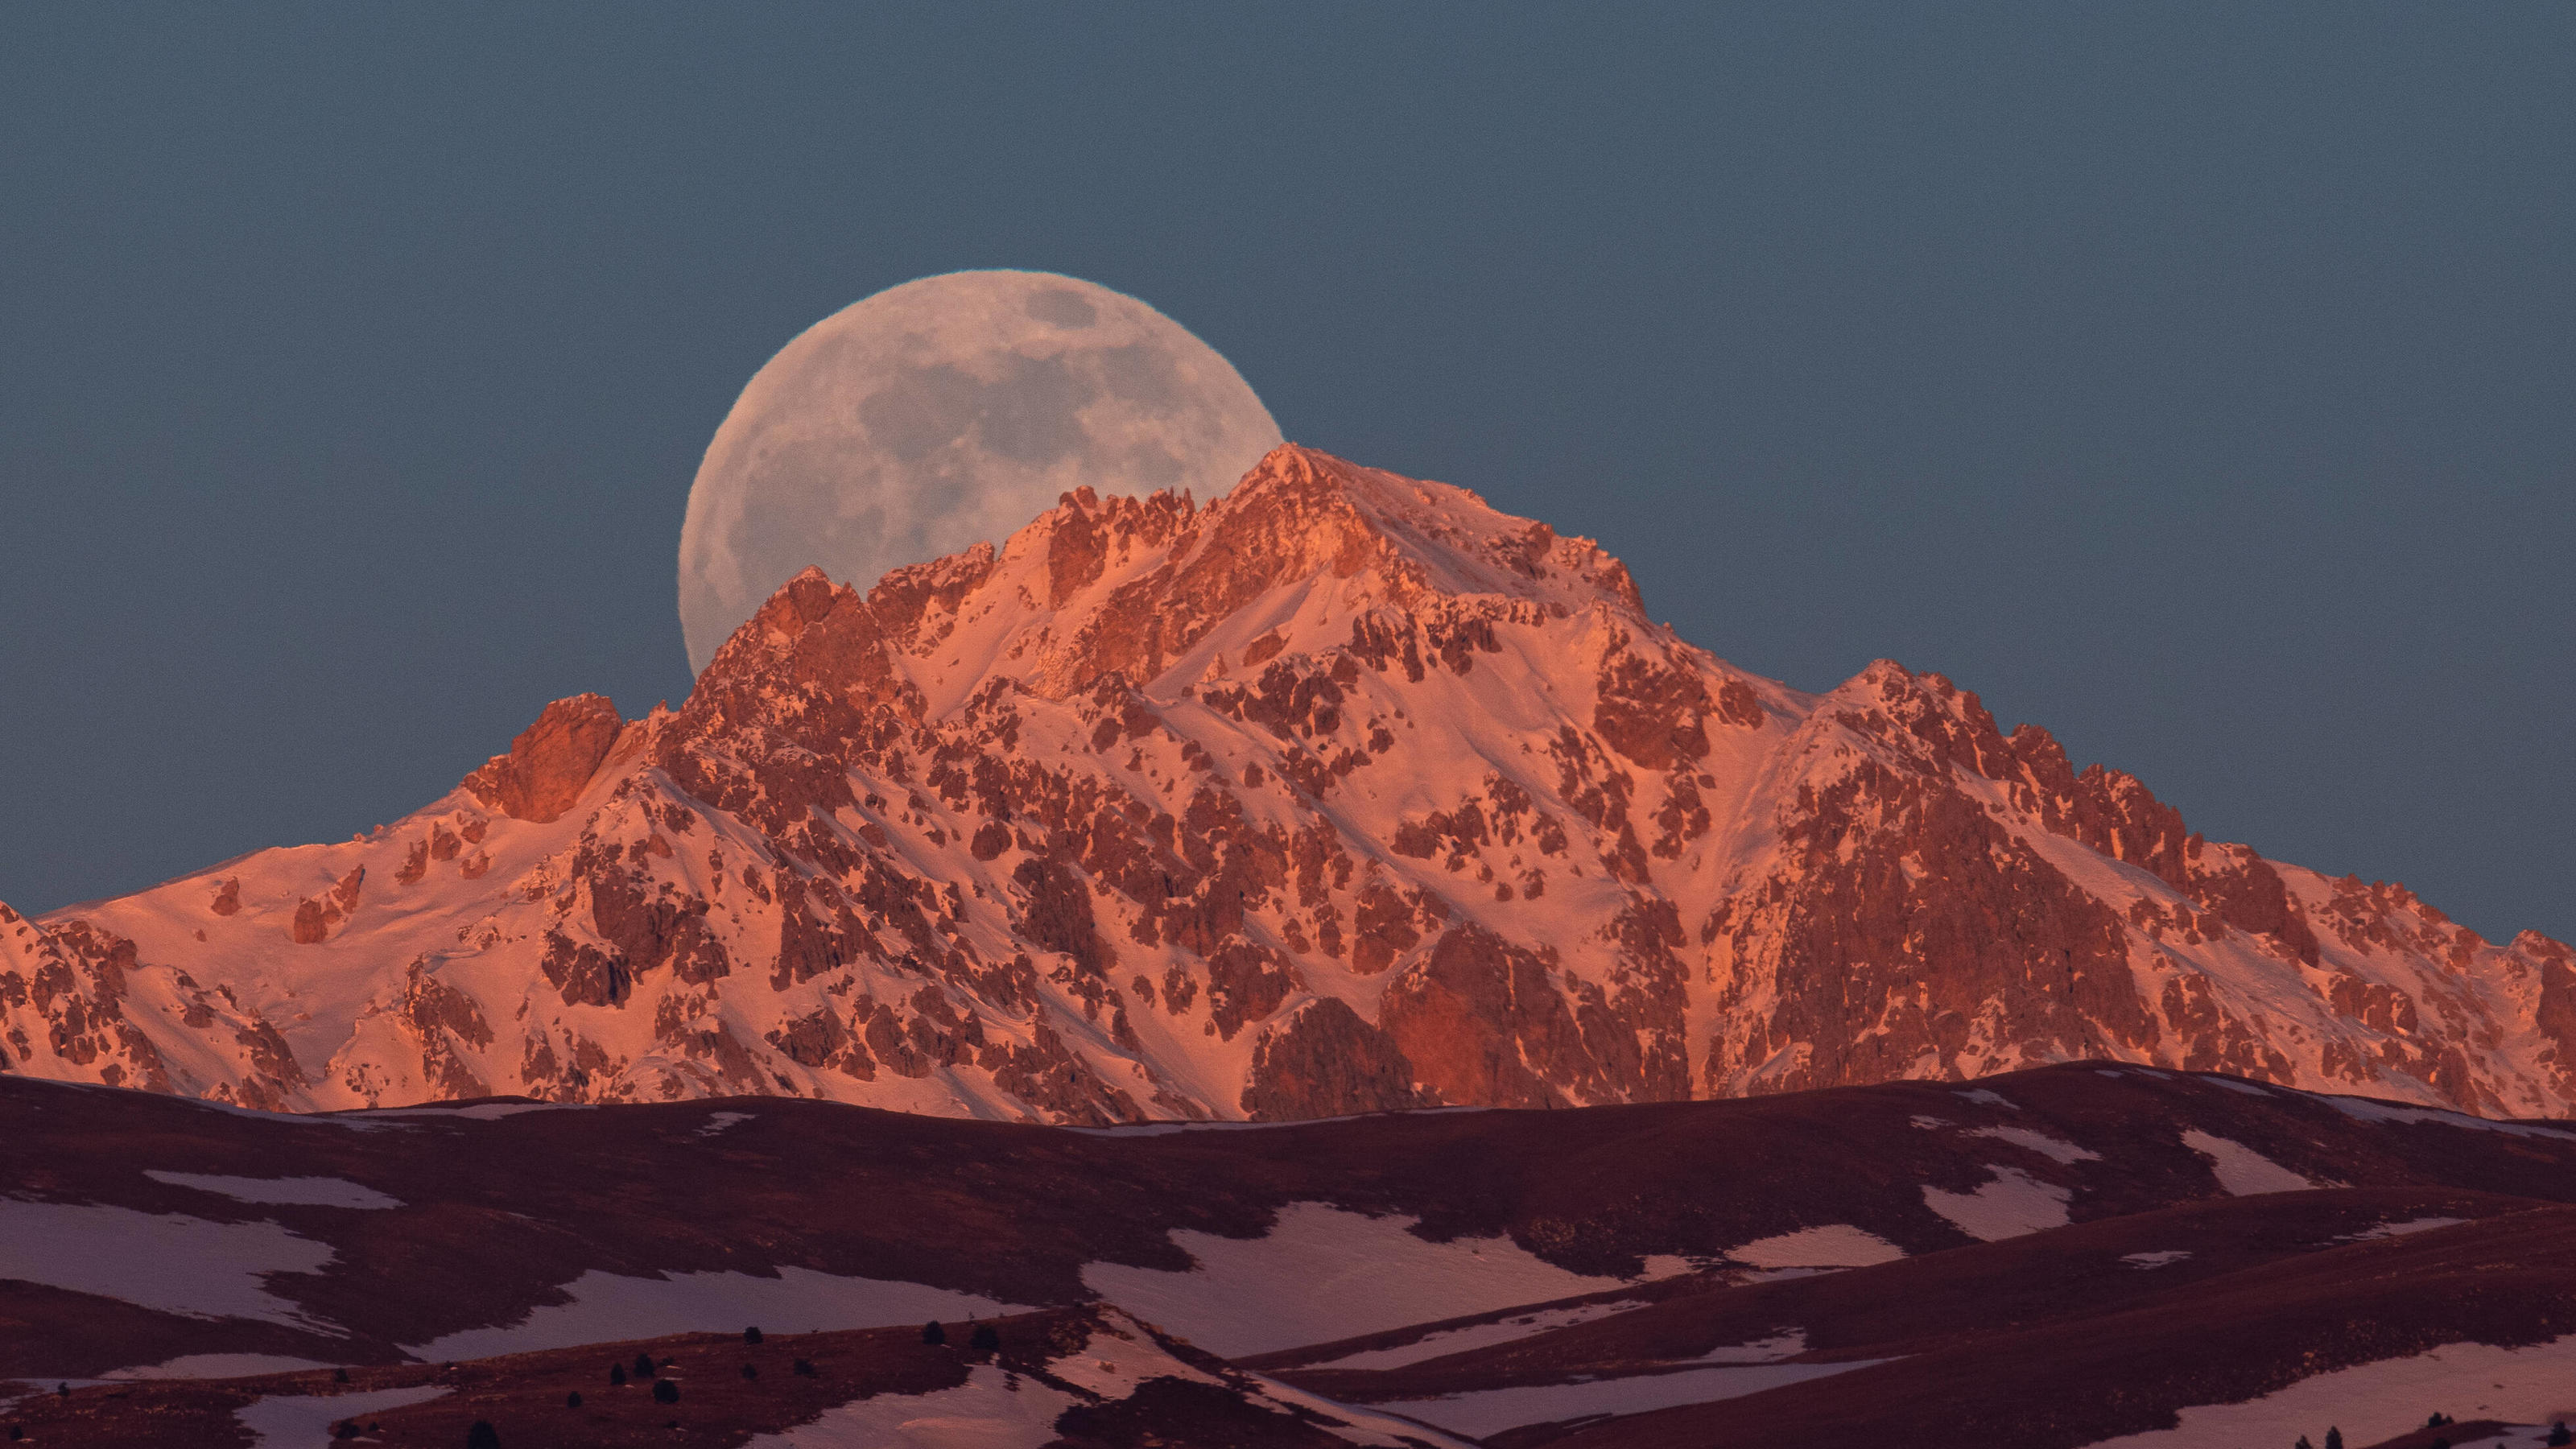  First 2022 Full Moon In Italy Full moon sets behind Monte Prena in Gran Sasso d Italia National Park on January, 2022. First full moon of the year is the Wolf moon according to native north Americans. L Aquila Italy PUBLICATIONxNOTxINxFRA Copyright: xLorenzoxDixColax originalFilename: dicola-notitle220117_npXTm.jpg